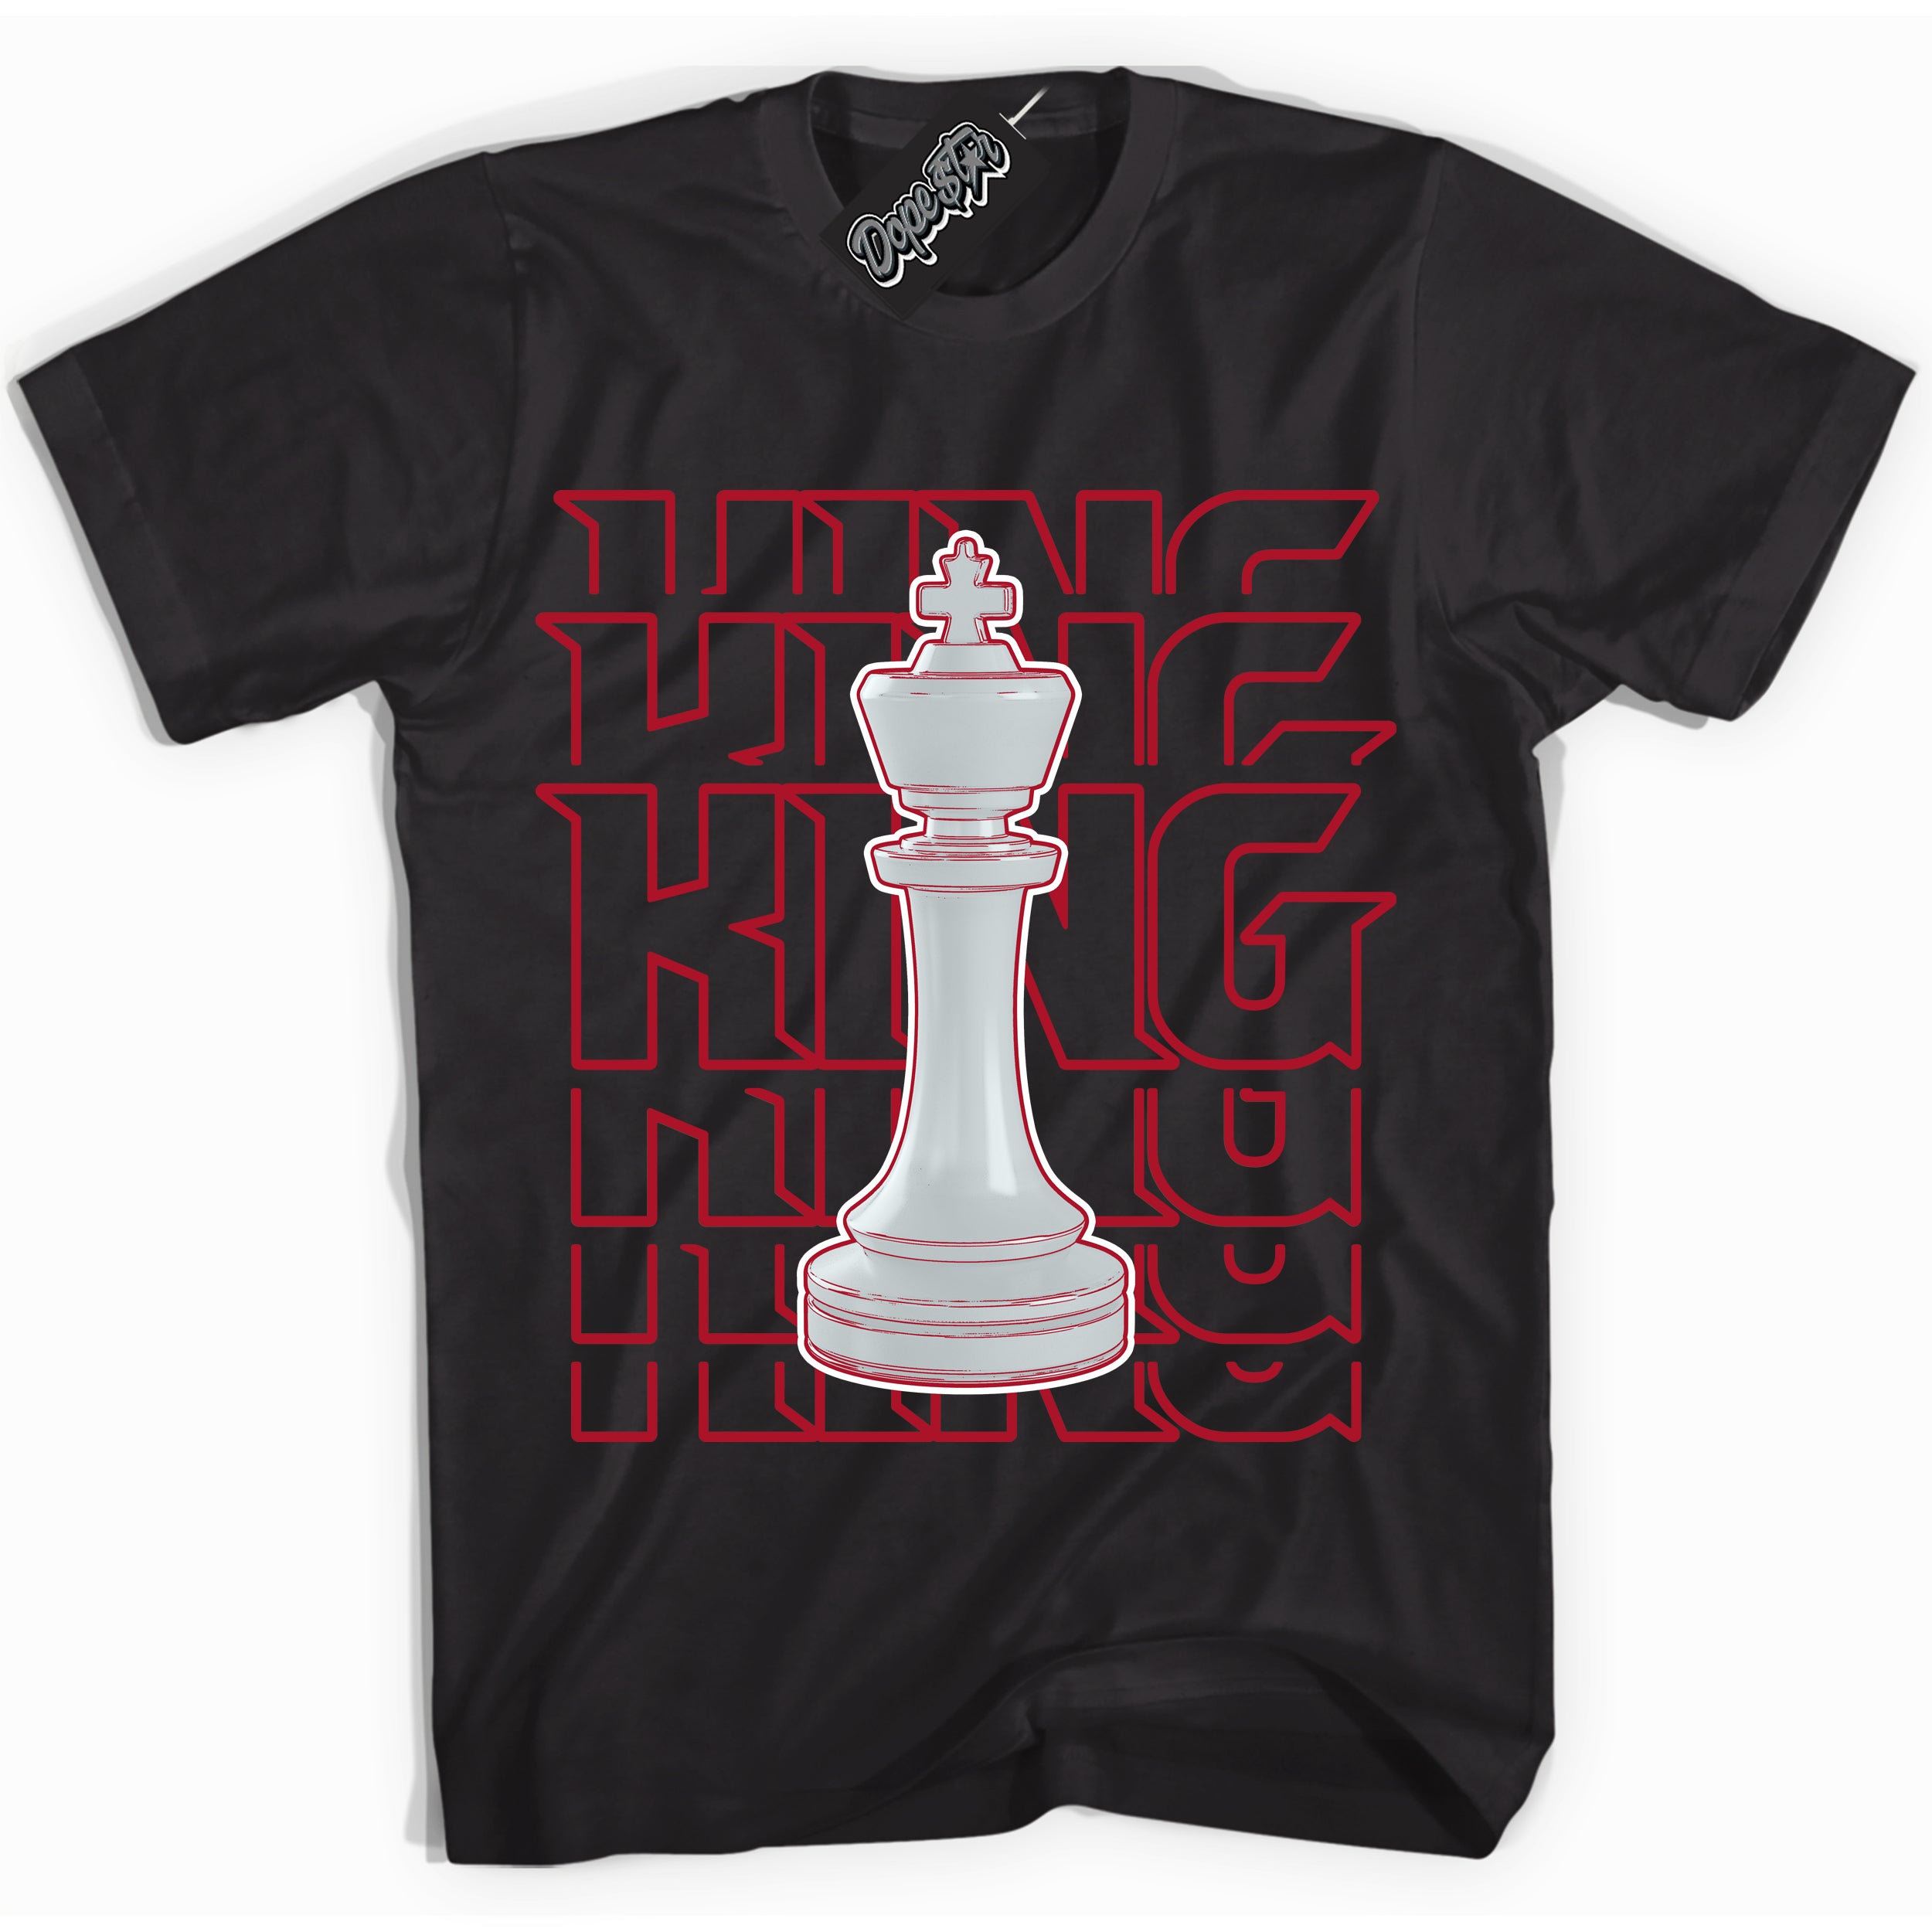 Cool Black Shirt with “ King Chess” design that perfectly matches Reverse Ultraman Sneakers.